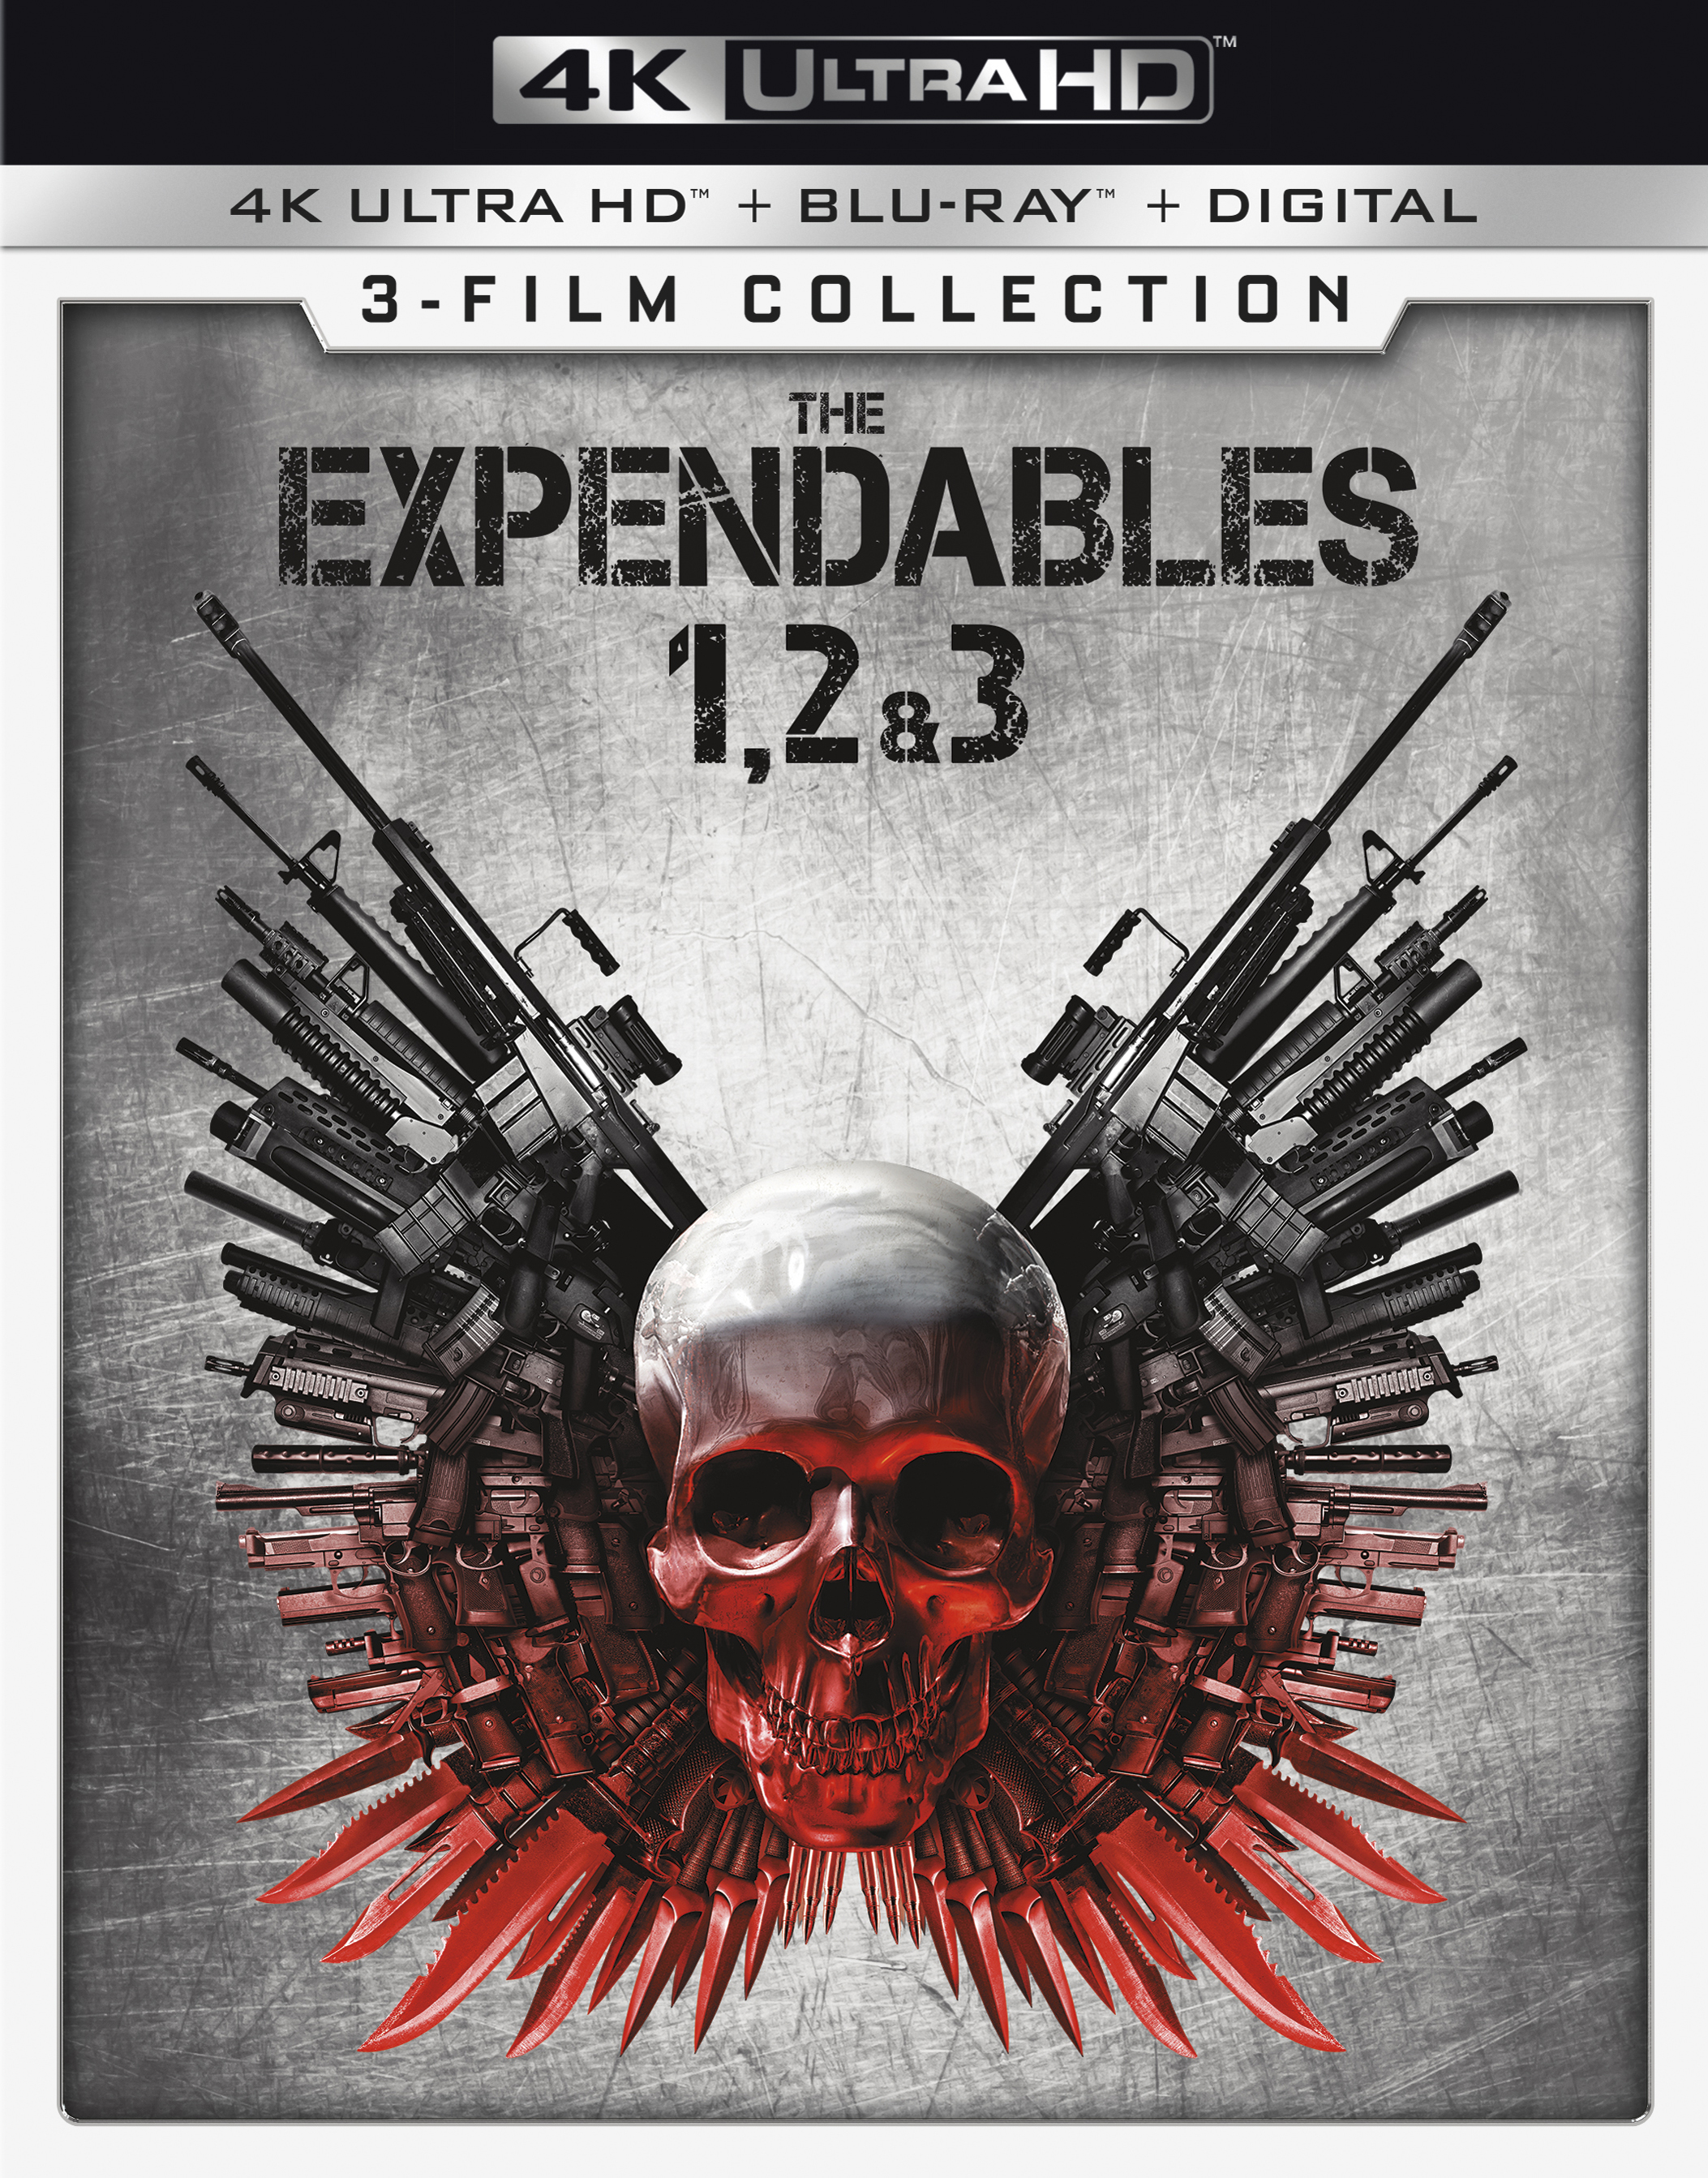 The Expendables 1, 2, and 3 (3-Film Collection) [4K Ultra HD+Blu-ray+Digital] - $16.99